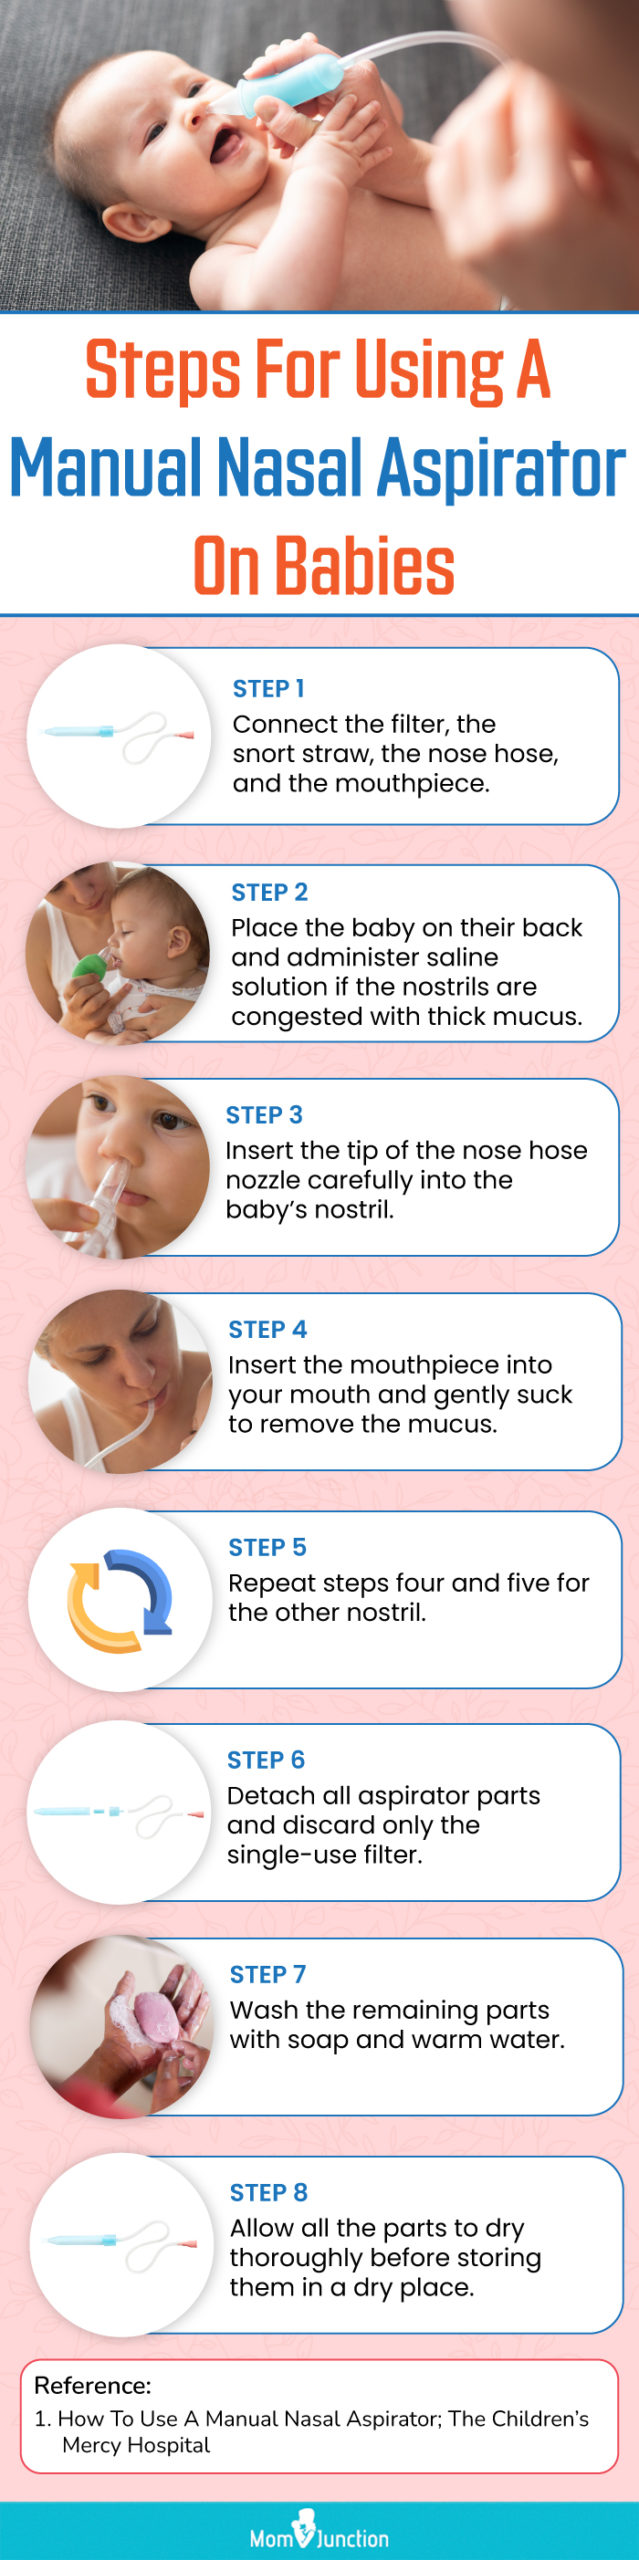 Steps For Using A Manual Nasal Aspirator On Babies (infographic)